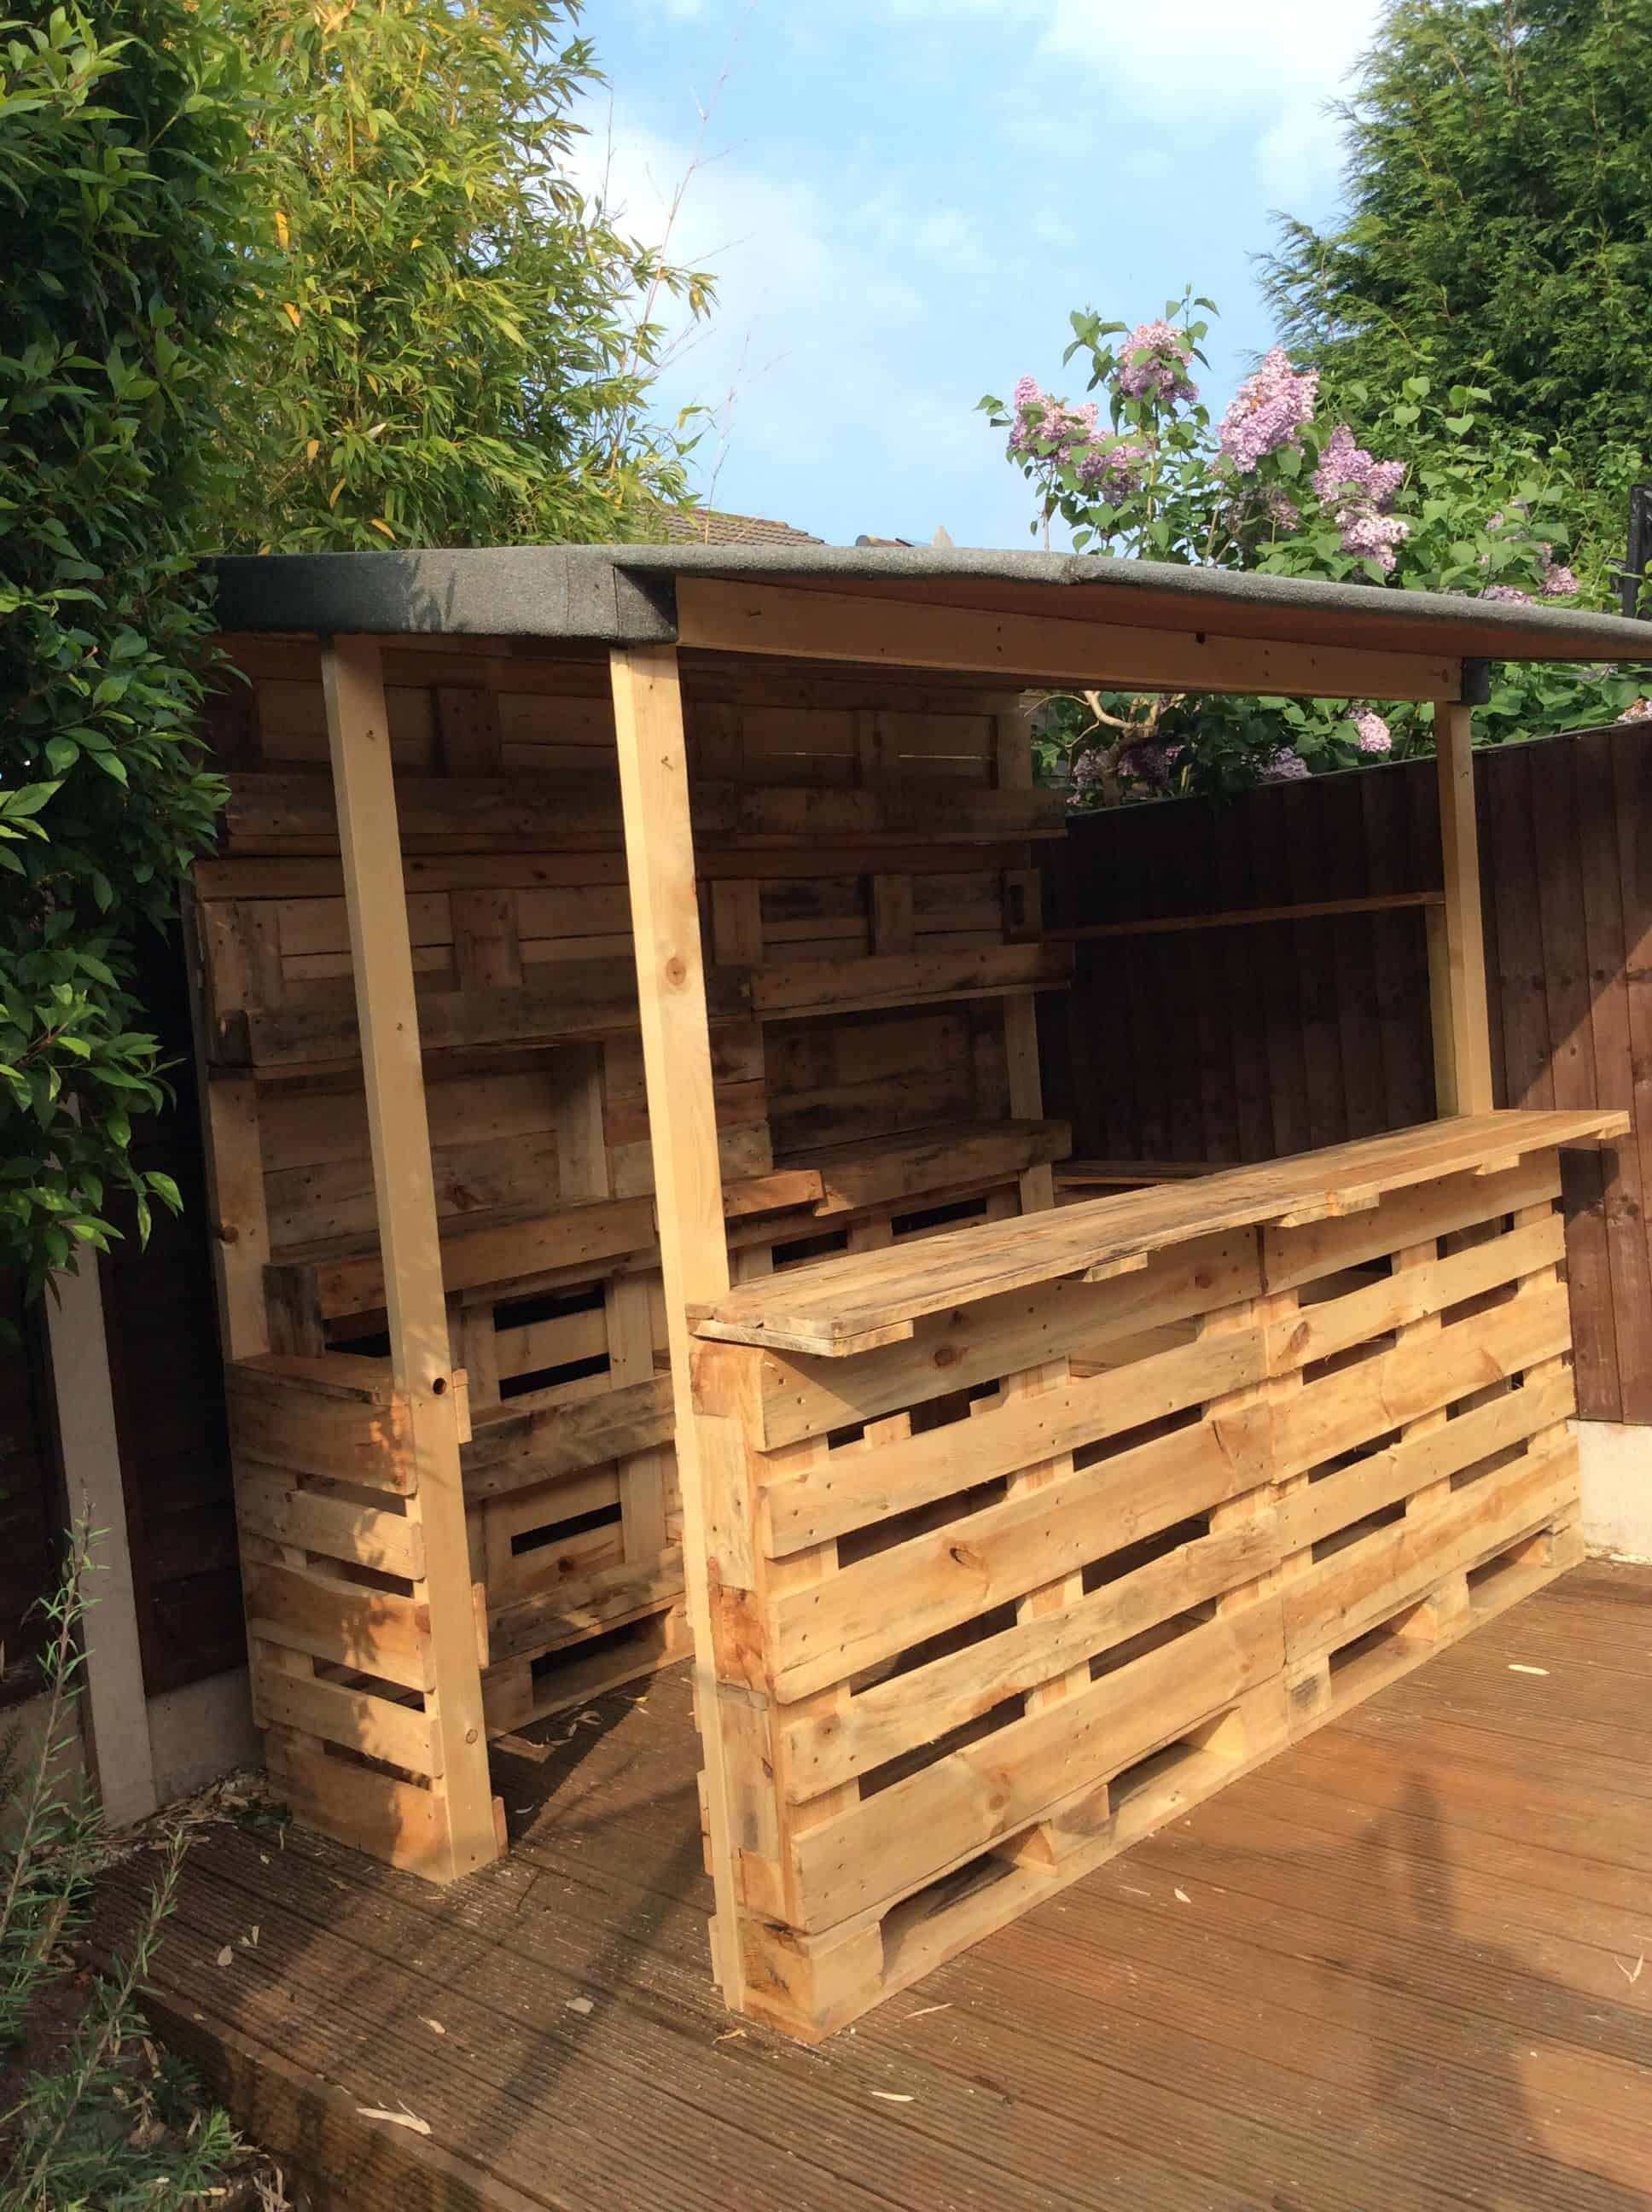 Outrageous Pallet Bar Out of 12 Reclaimed Pallets • 1001 Pallets - Outrageous Pallet Bar Out of 12 Reclaimed Pallets • 1001 Pallets -   17 diy Outdoor bar ideas